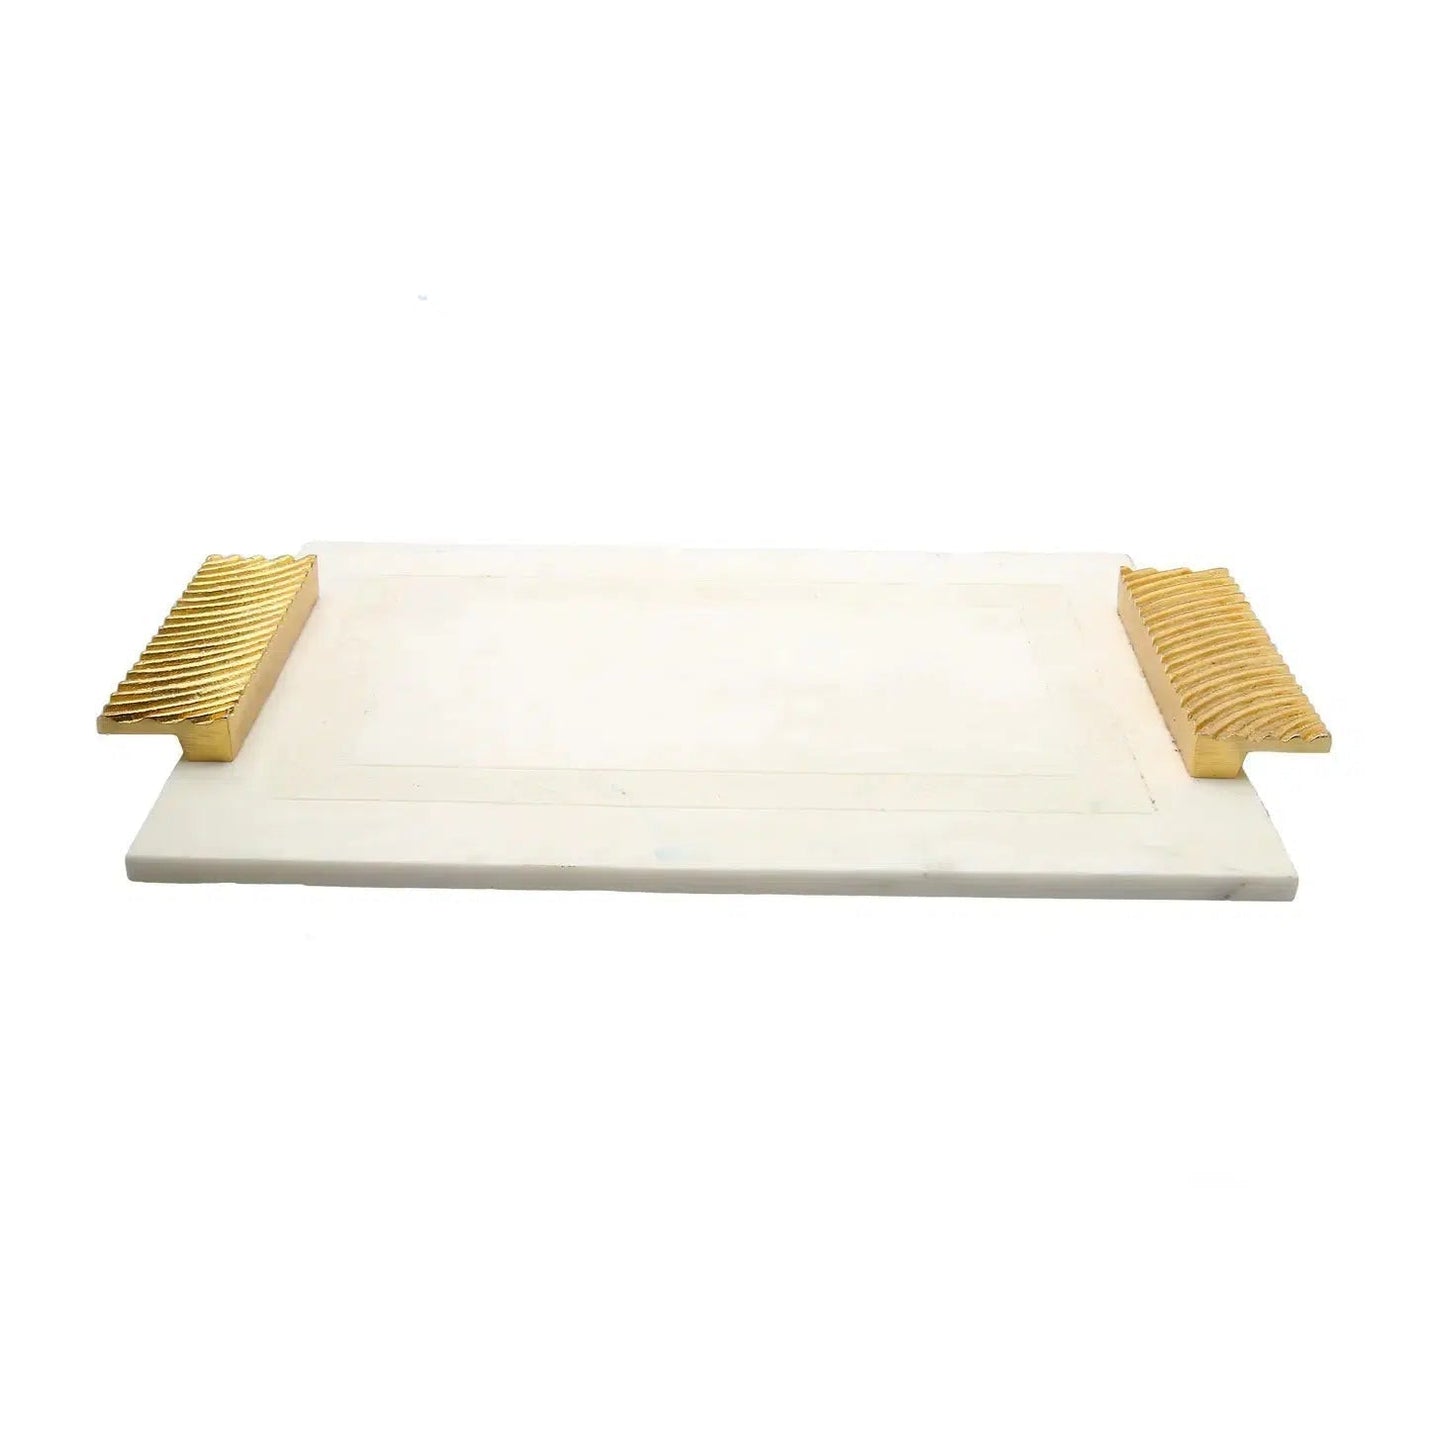 White Marble Tray With Embossed Gold Handles 16x11" Decorative Trays High Class Touch - Home Decor 